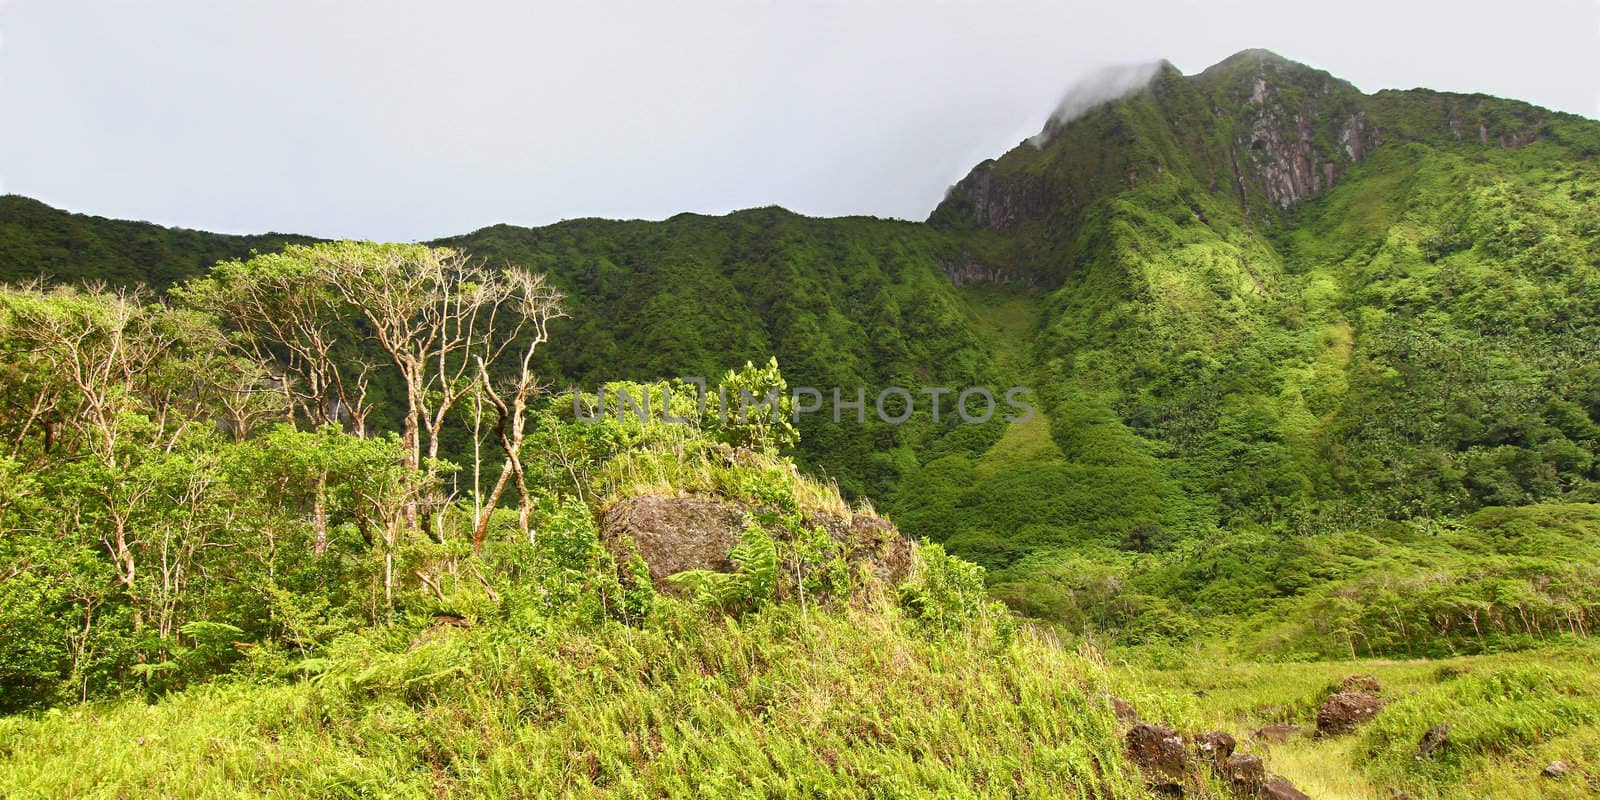 View of Mount Liamuiga from the bottom of The Crater of Saint Kitts.